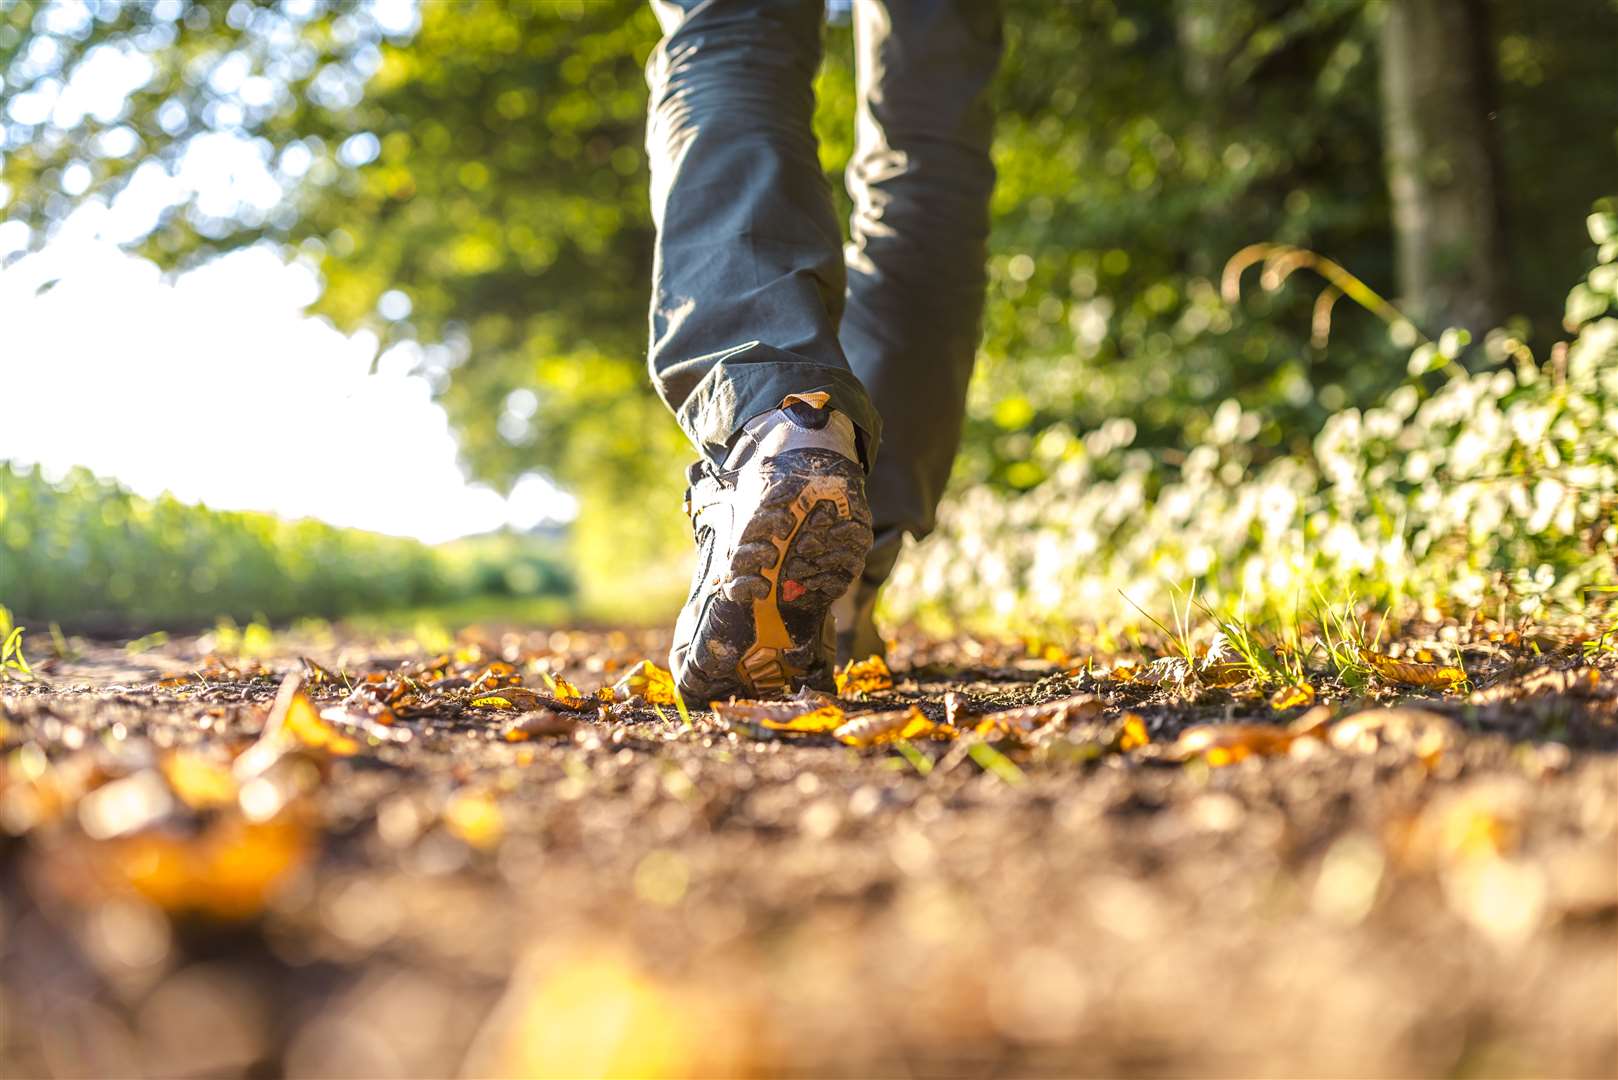 Walking in the country is ideal for both mental and physical health.